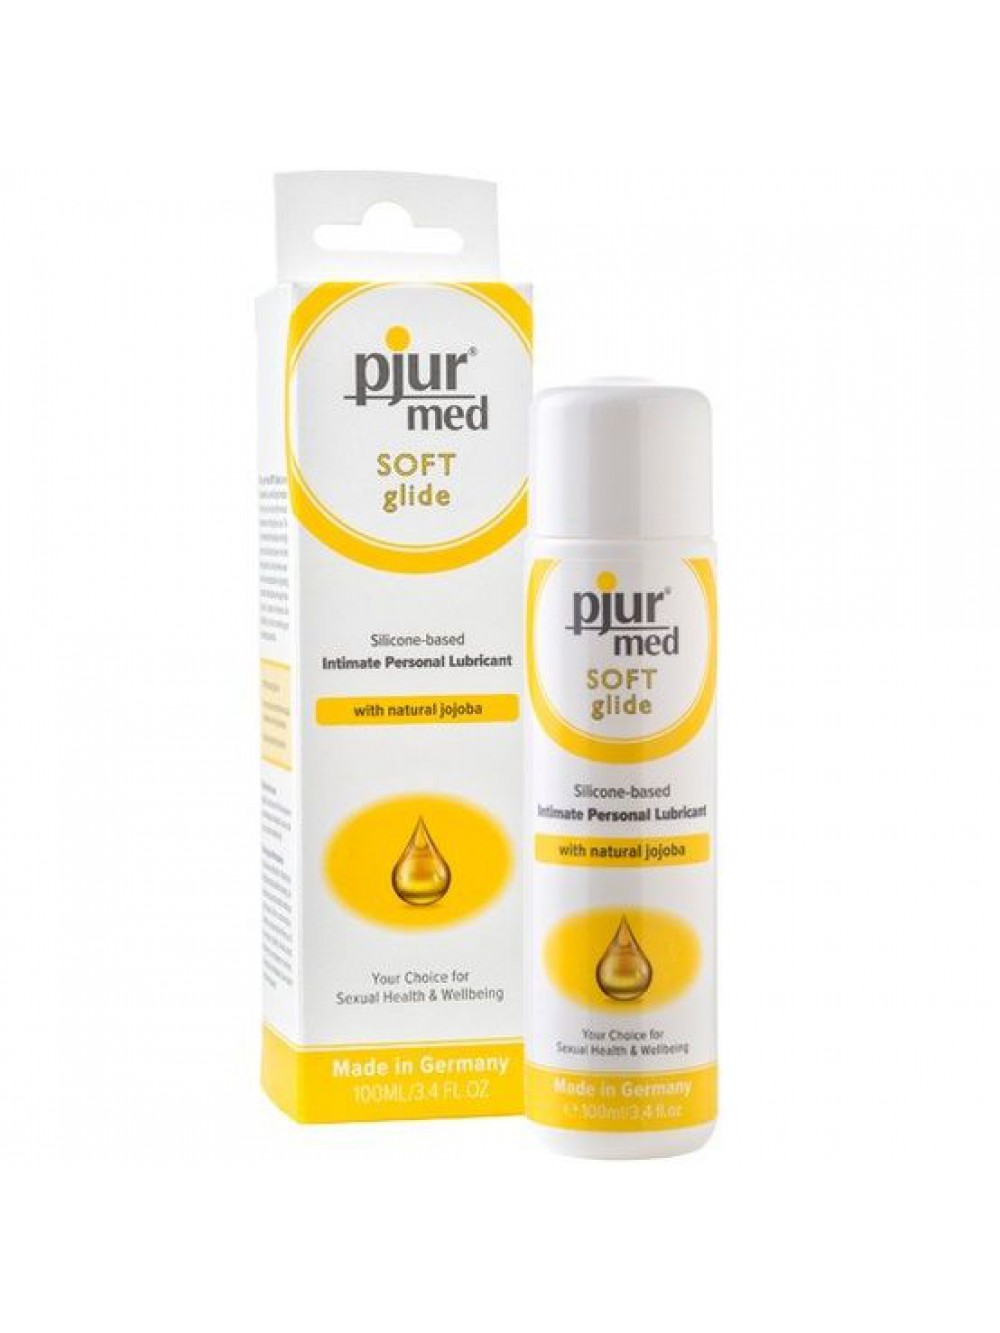 PJUR MED SOFT GLIDE SILICONE BASED INTIMATE PERSONAL LUBRICANT